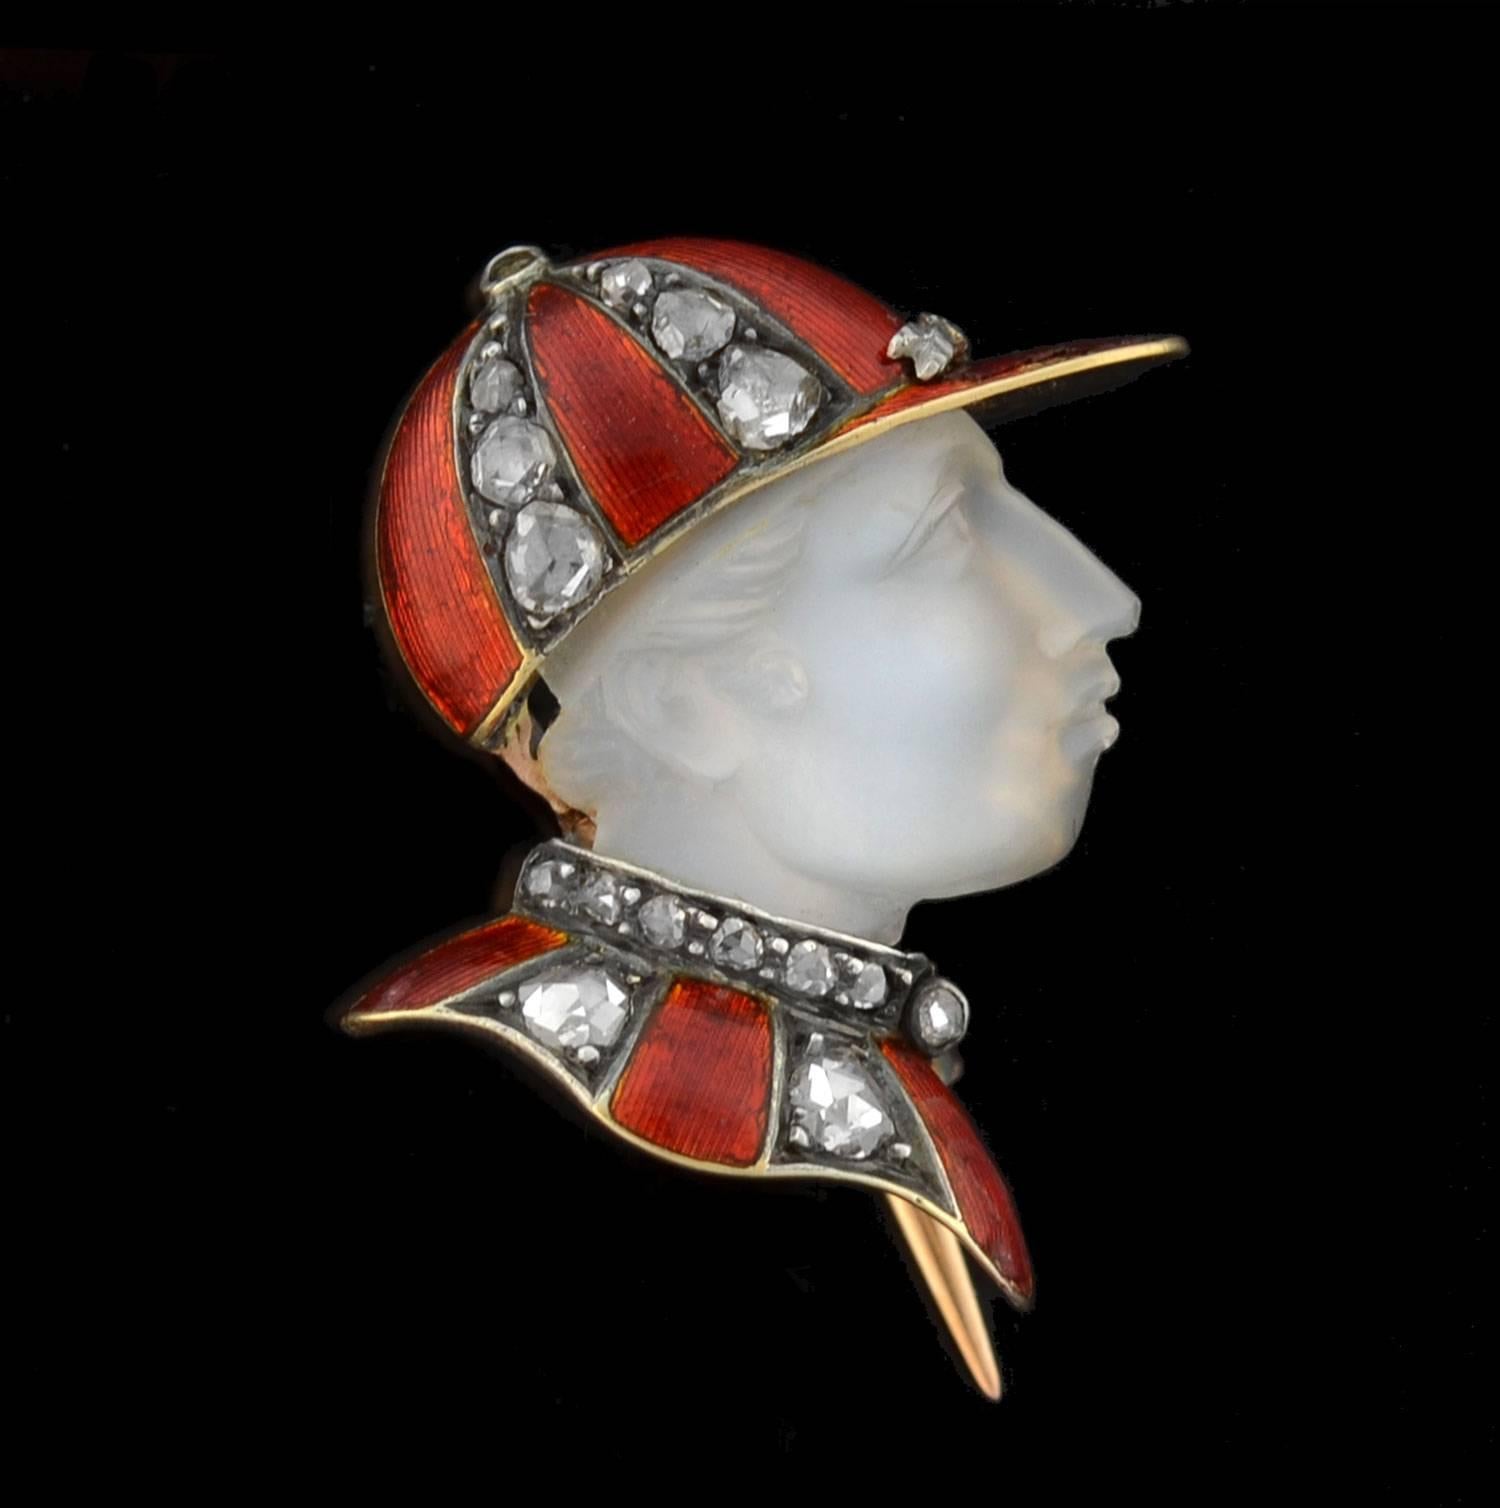 An absolutely exquisite and unusual jockey pin from the Victorian (ca1880) era! This beautifully made piece, which is French in origin, is crafted in 18kt yellow gold and has a fantastic equine-inspired design. The pin itself depicts the bust of a